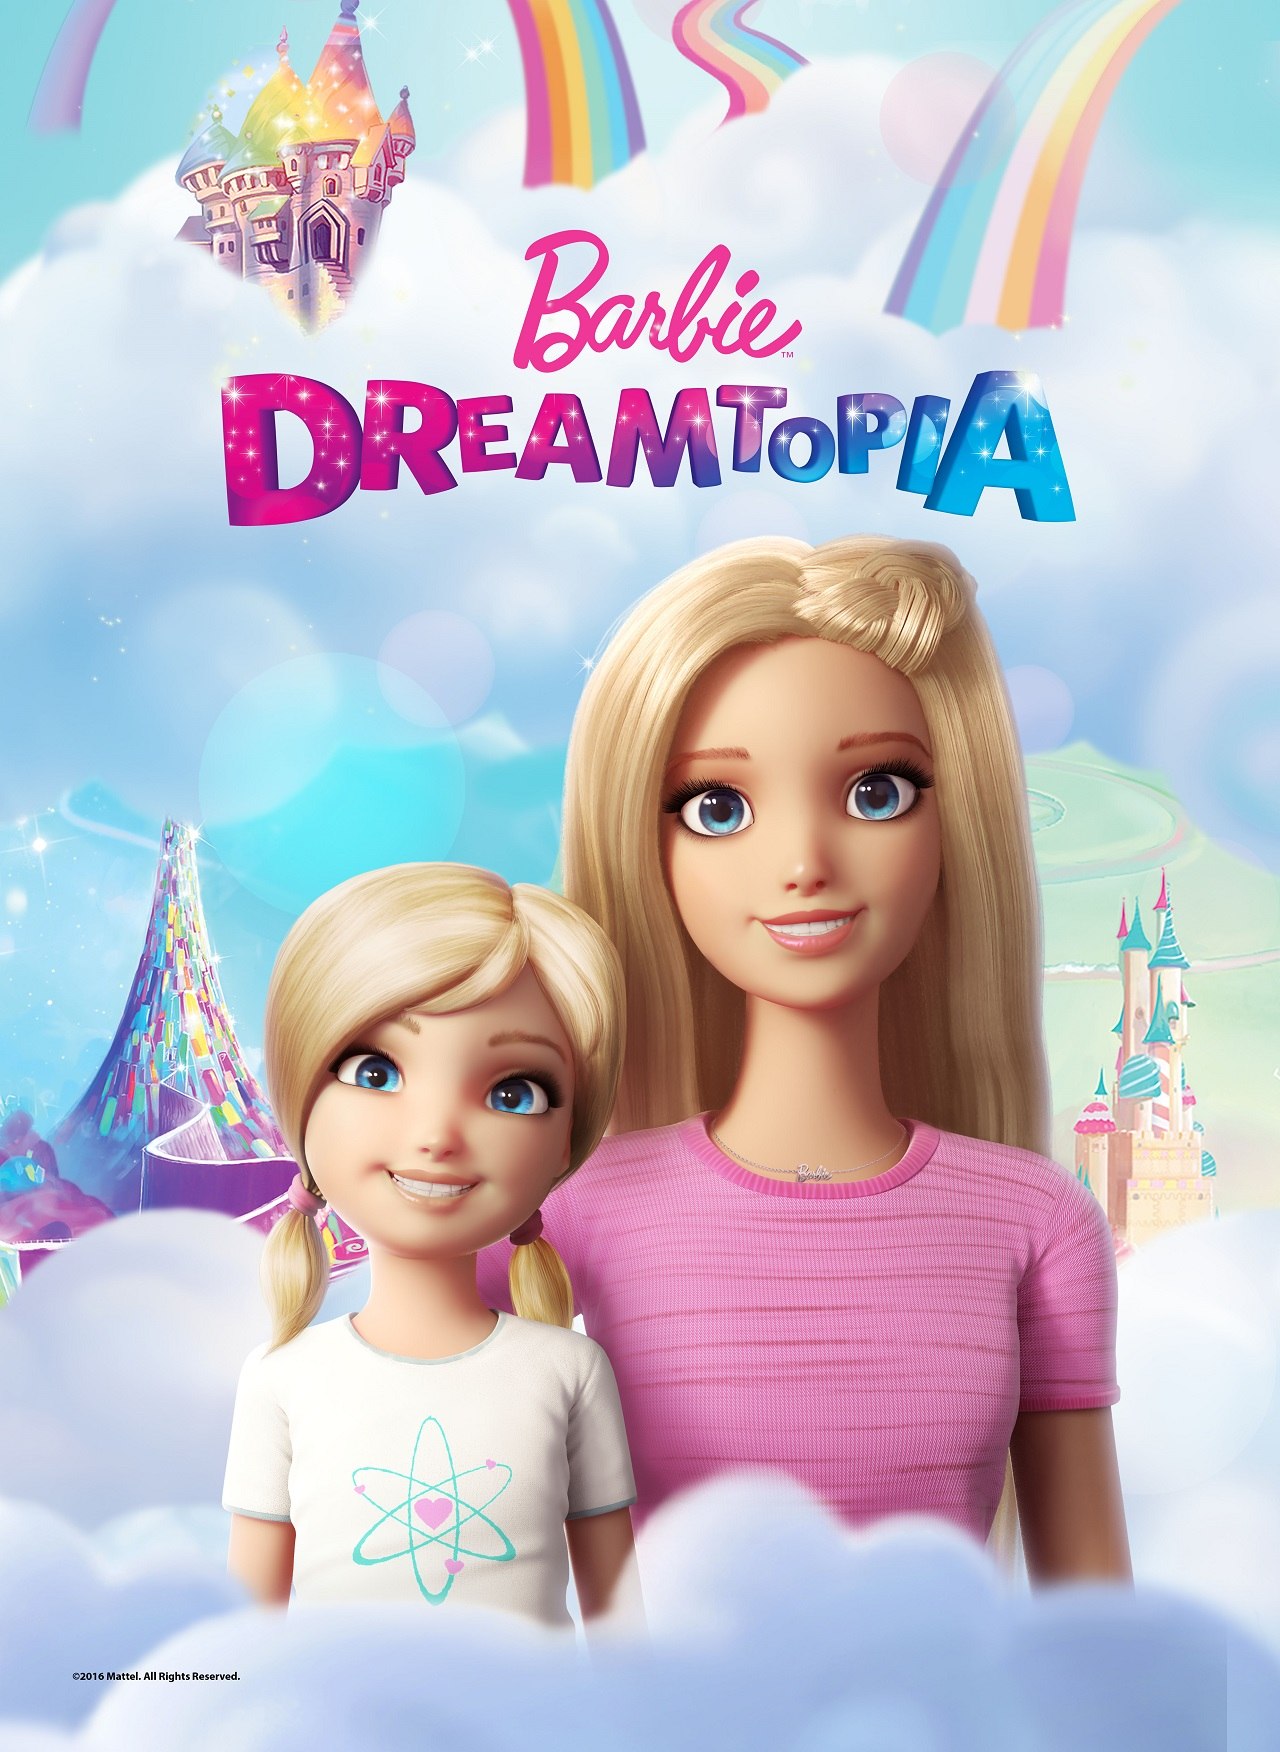 Barbie 2017 Memory download the last version for apple